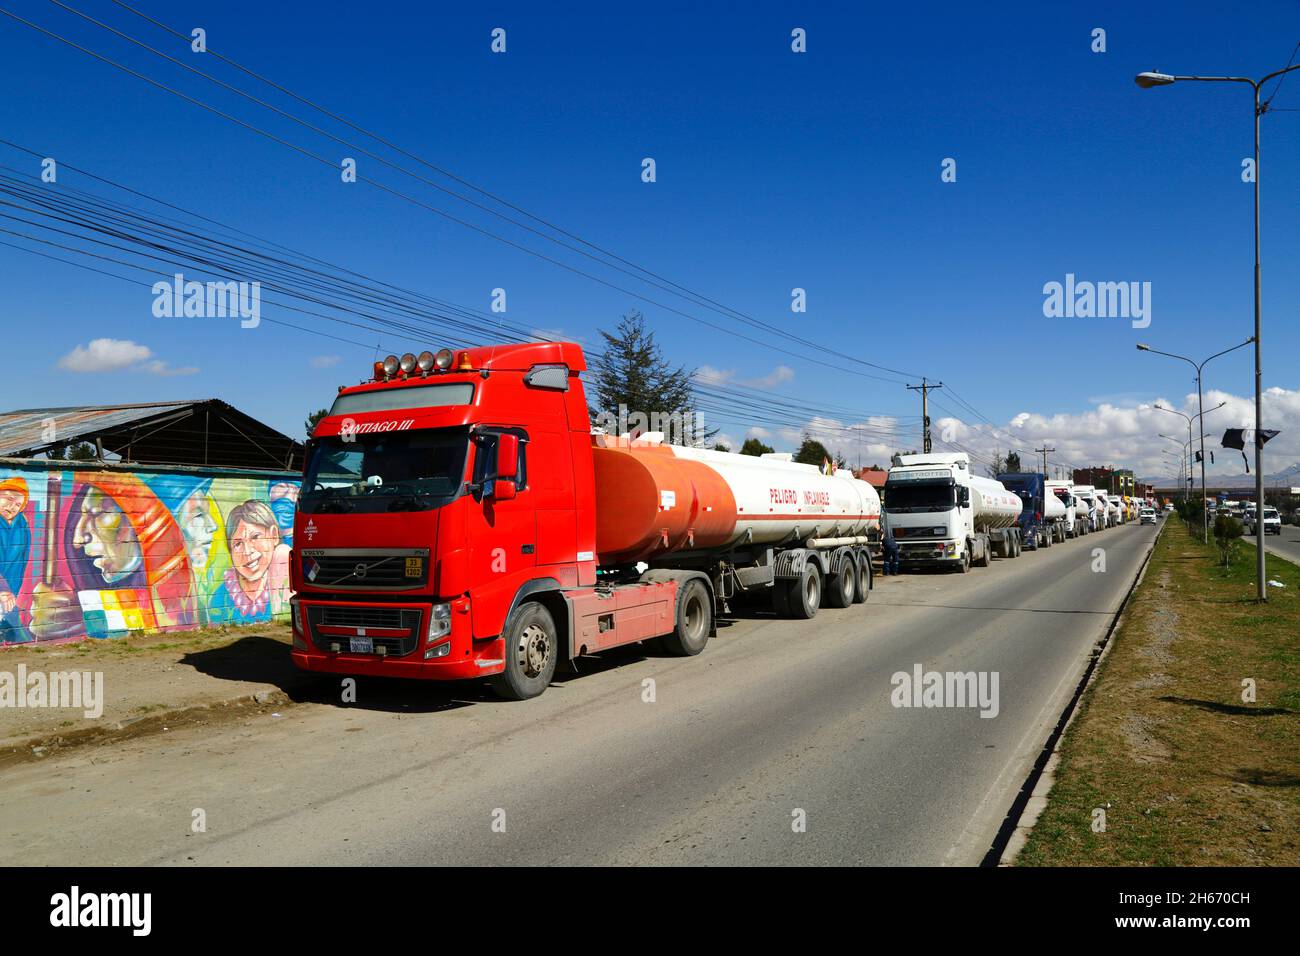 Senkata, El Alto, Bolivia. 13th November 2021. Fuel tank trucks queue outside the Senkata Fuel Plant on Av 6 de Marzo / Camino Oruro in El Alto. Yacimientos Petrolíferos Fiscales Bolivianos (YPFB, Bolivia's state owned petroleum / hydrocarbons company) have a large refinery and storage plant here: it is also the distribution centre for supplying La Paz, El Alto and the surrounding area. Stock Photo